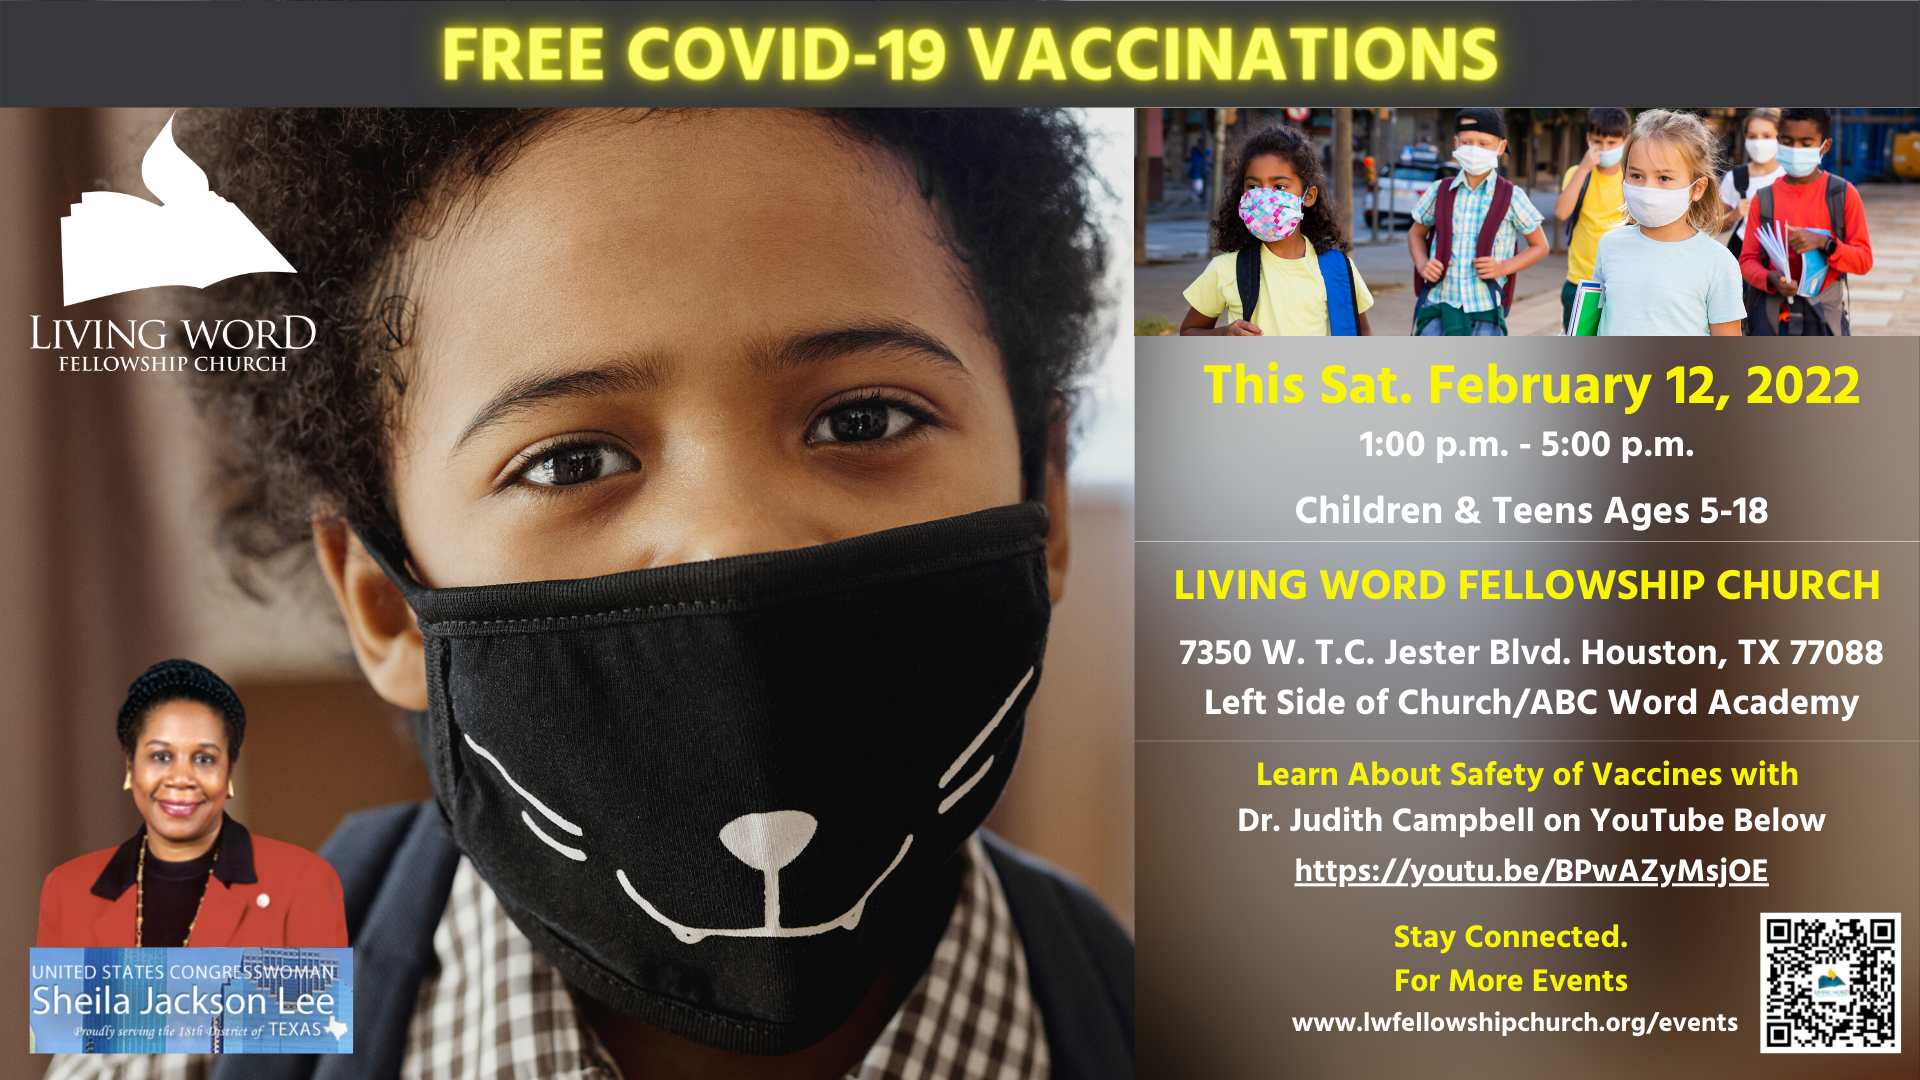 FREE Covid-19 Vaccinations for Kids & Teens – Sat. Feb. 12th 1:00 p.m. head image